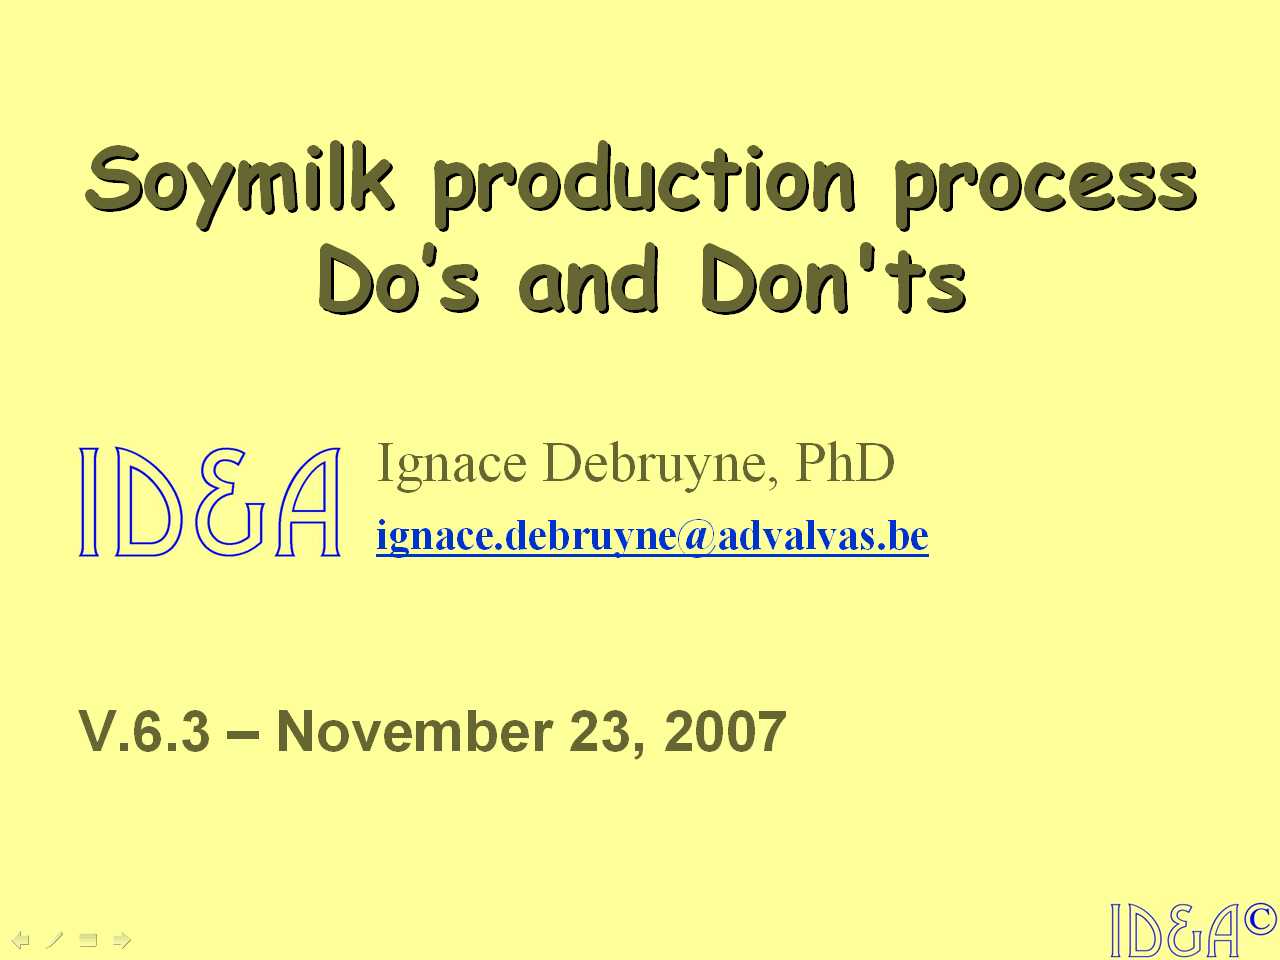 DO's and DON'ts in Soymilk Technology